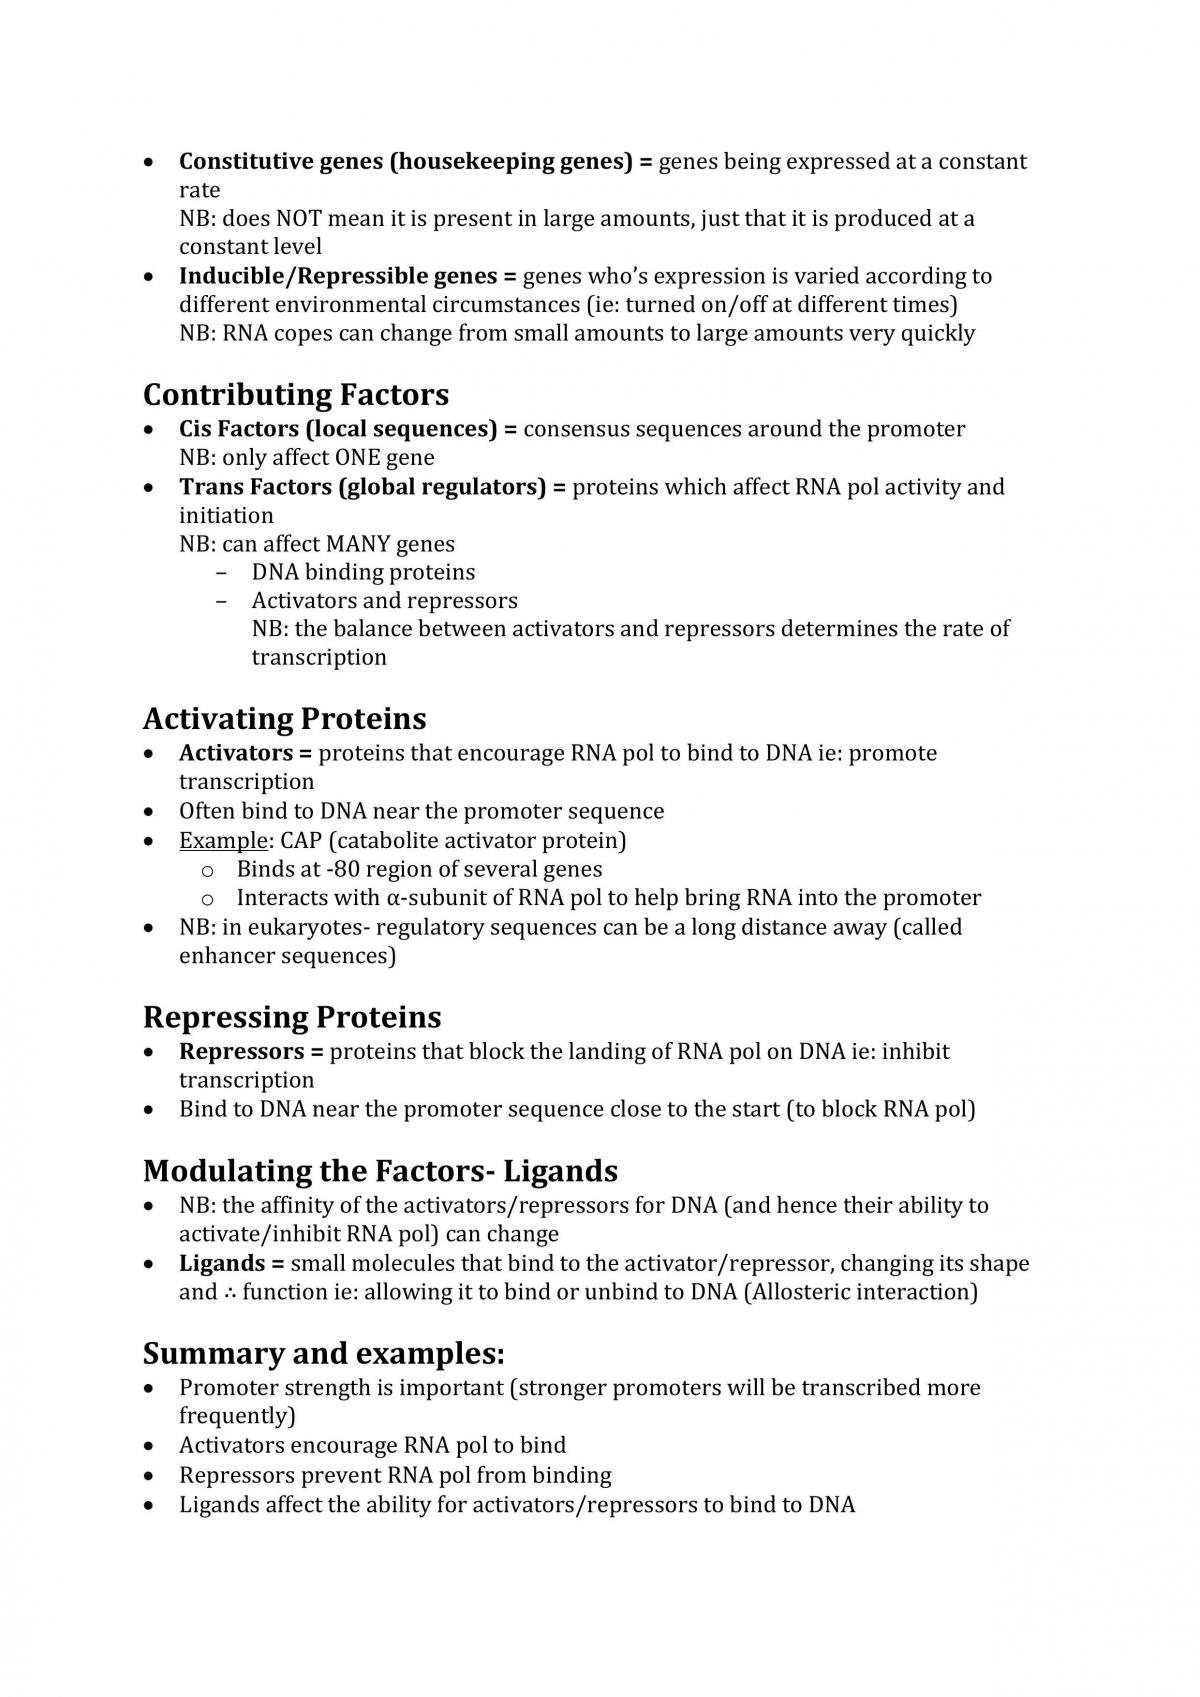 MBLG1001 Complete Study Notes - Page 50